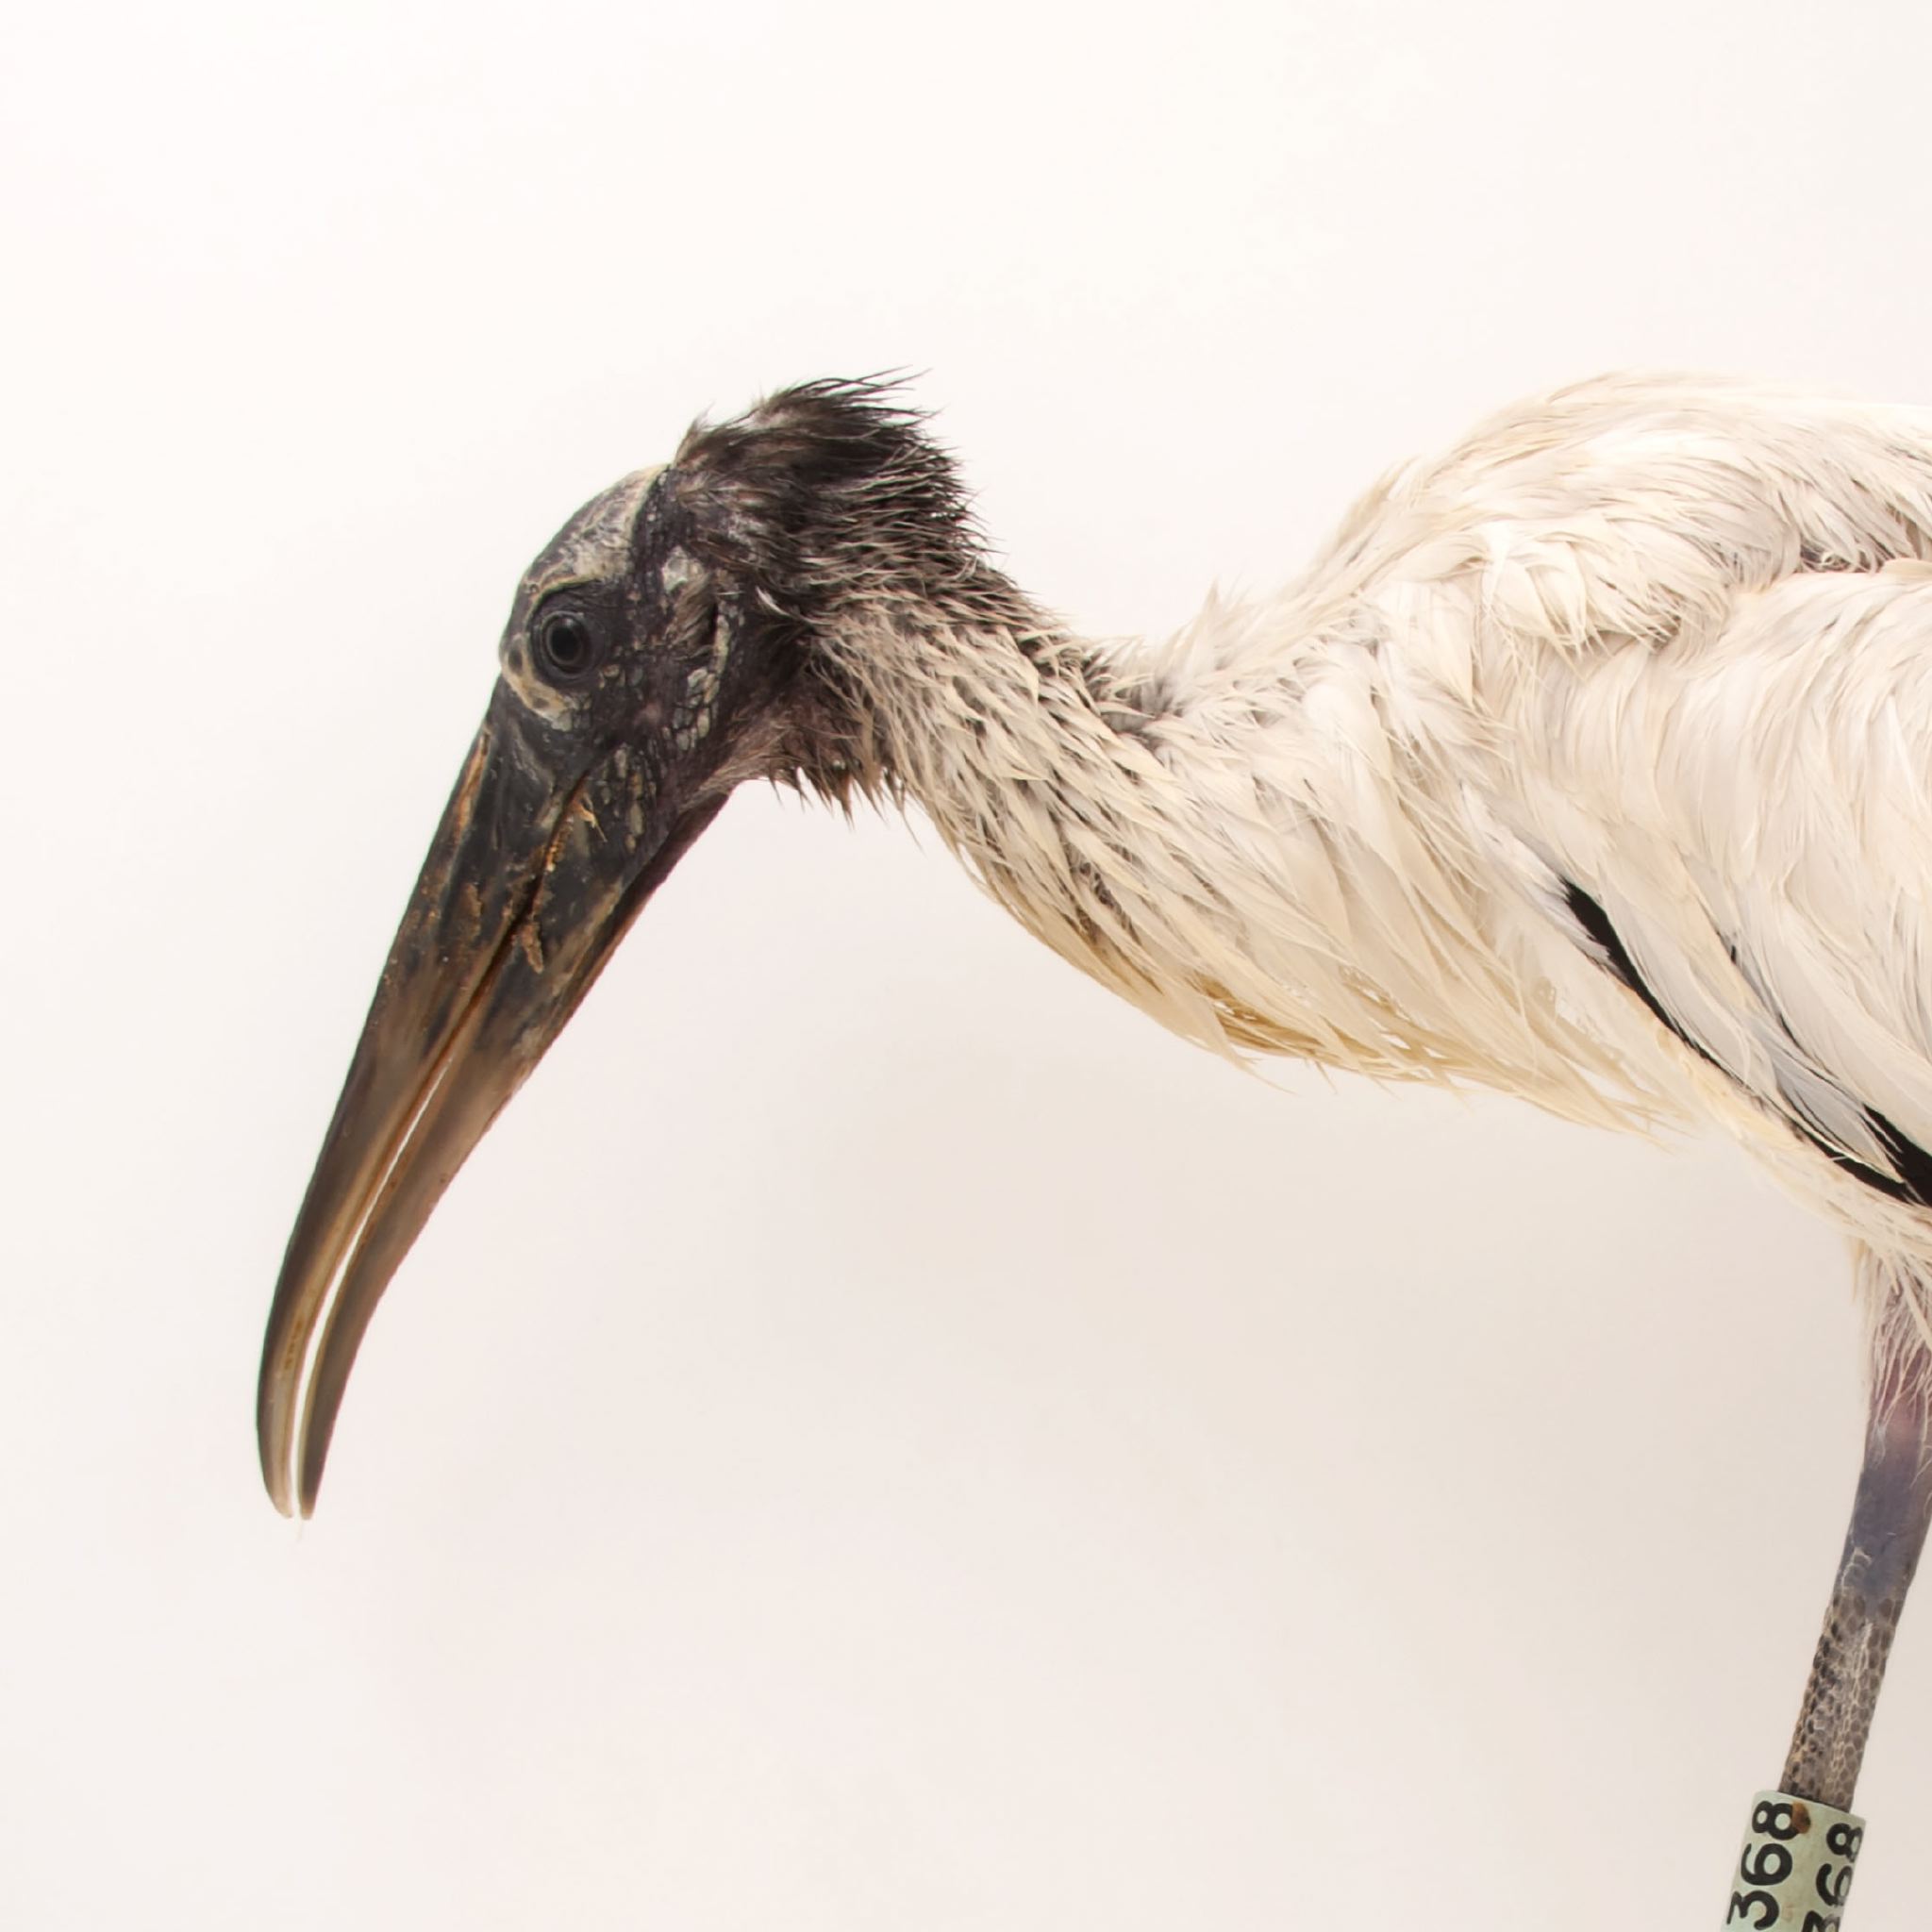 Wood Stork | National Geographic